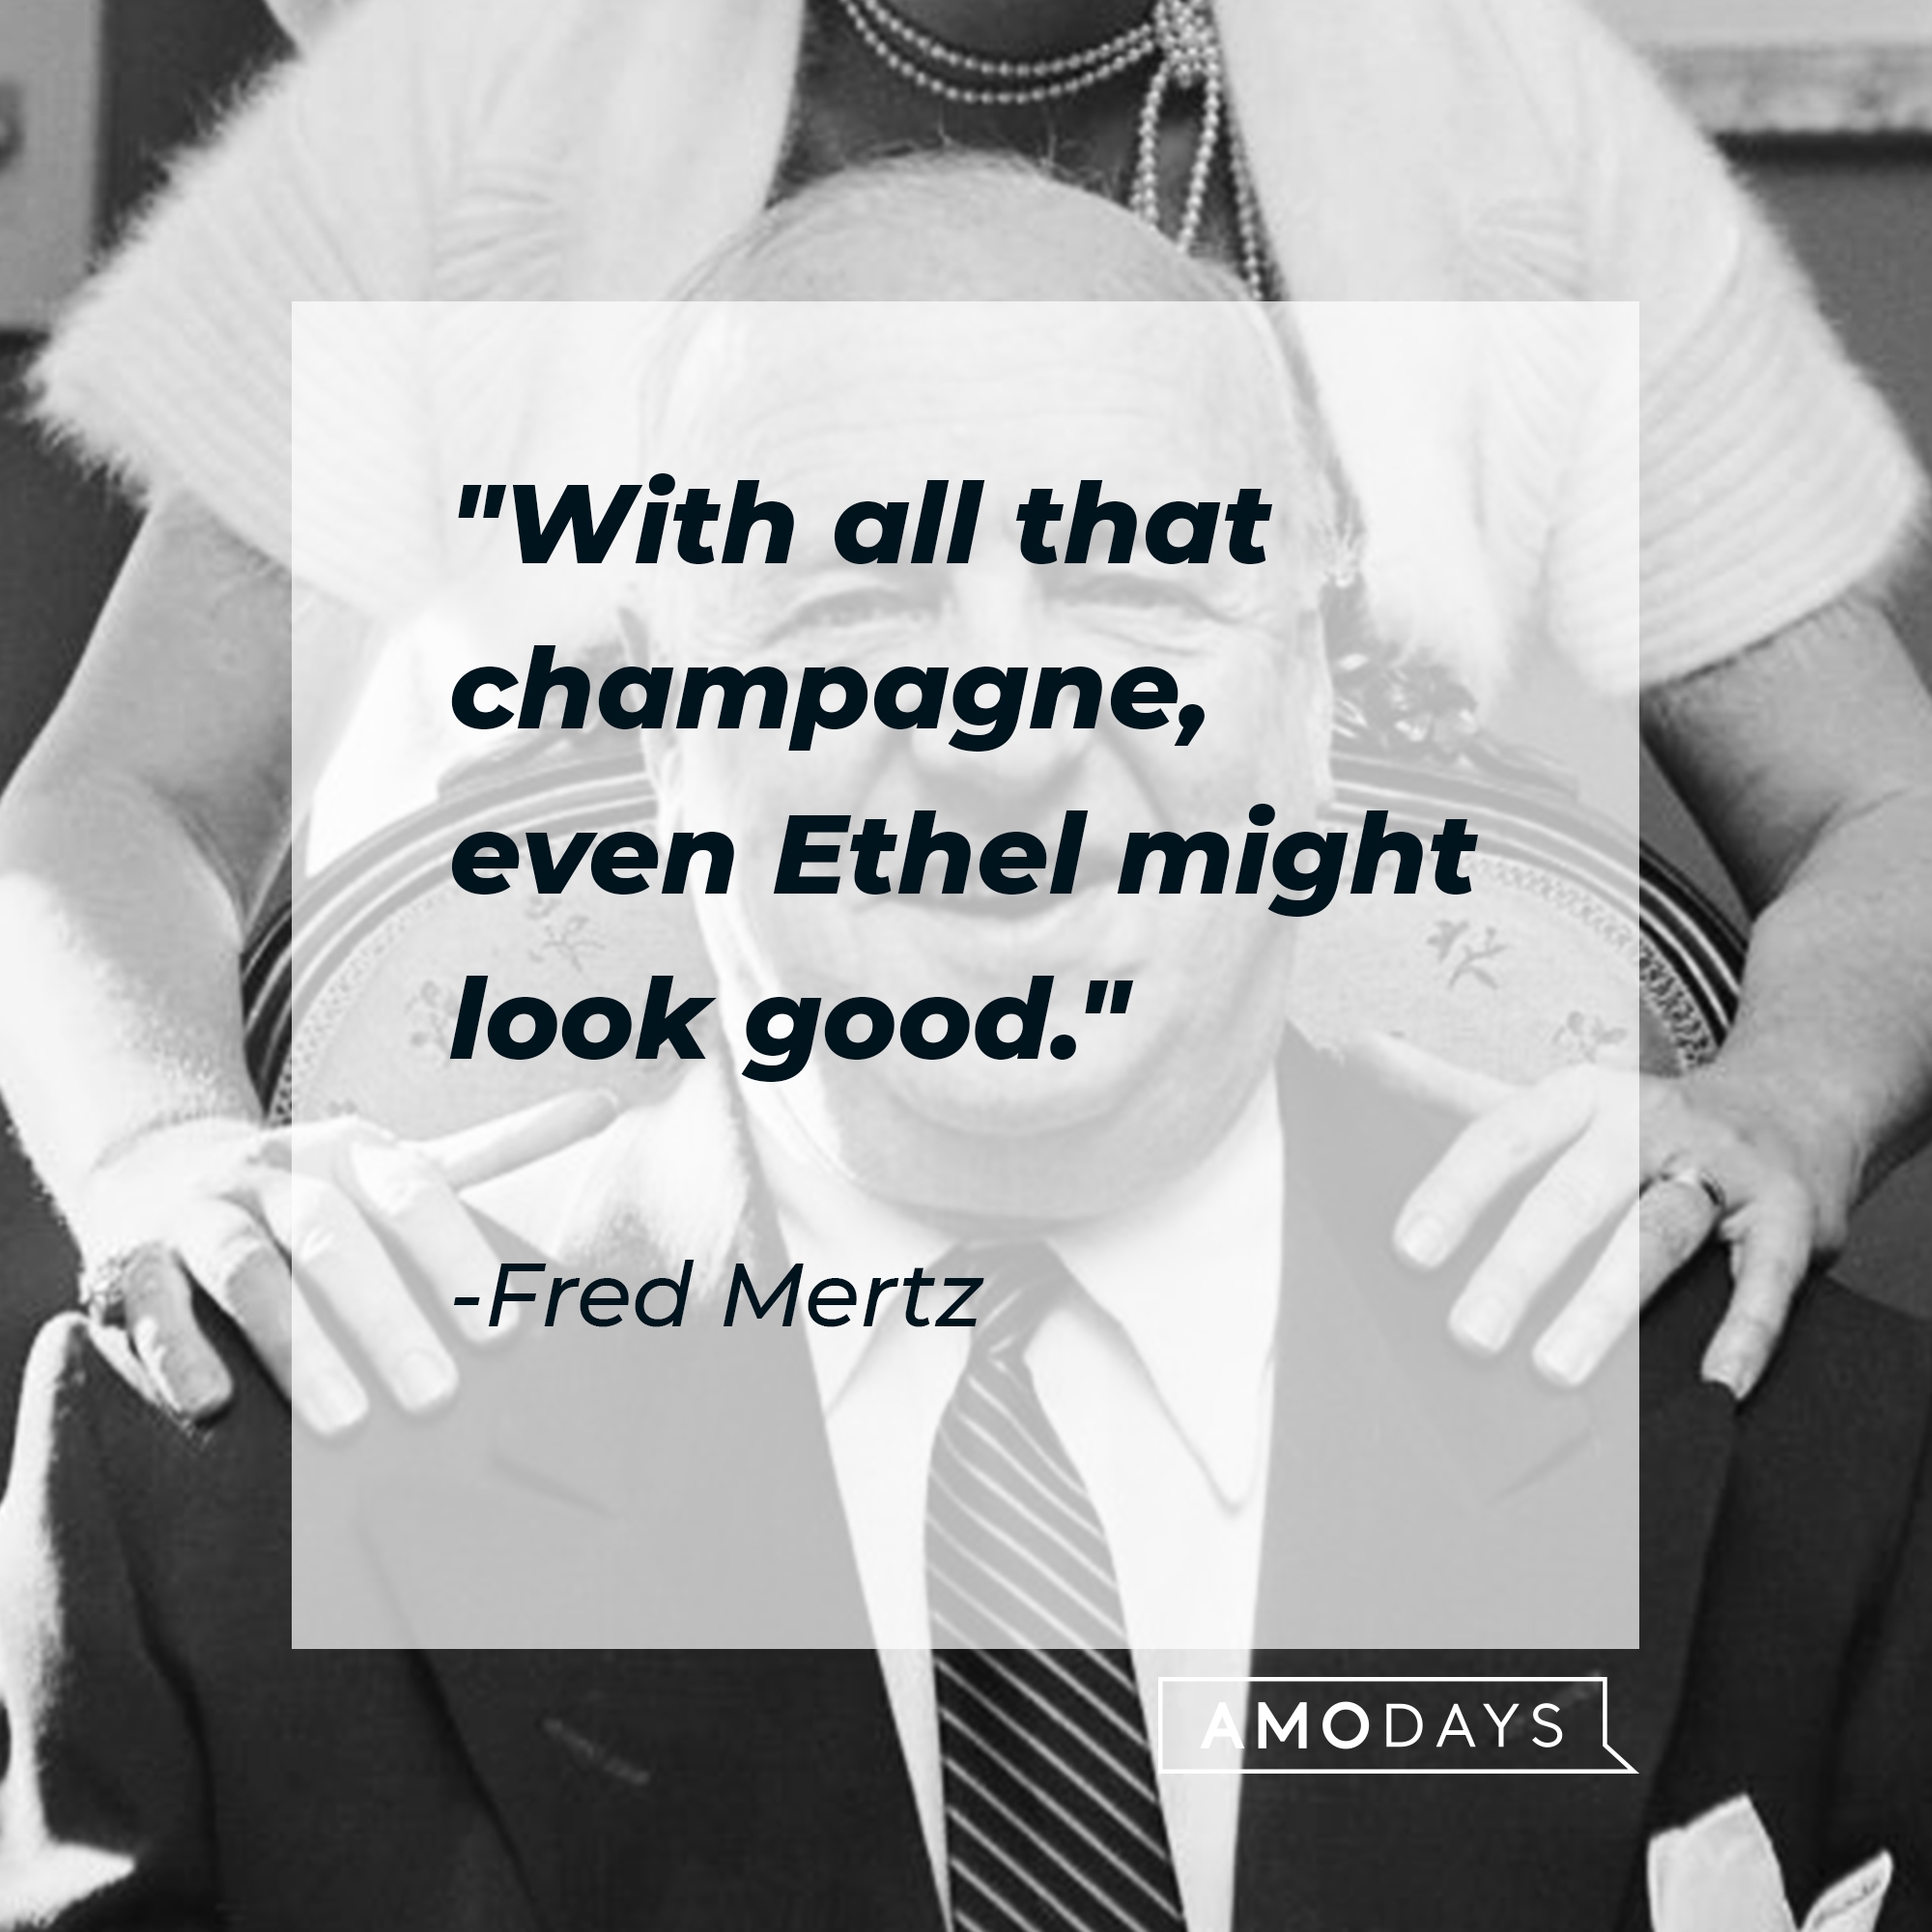 Fred Mertz's quote: "With all that champagne, even Ethel might look good." | Source: Getty Images